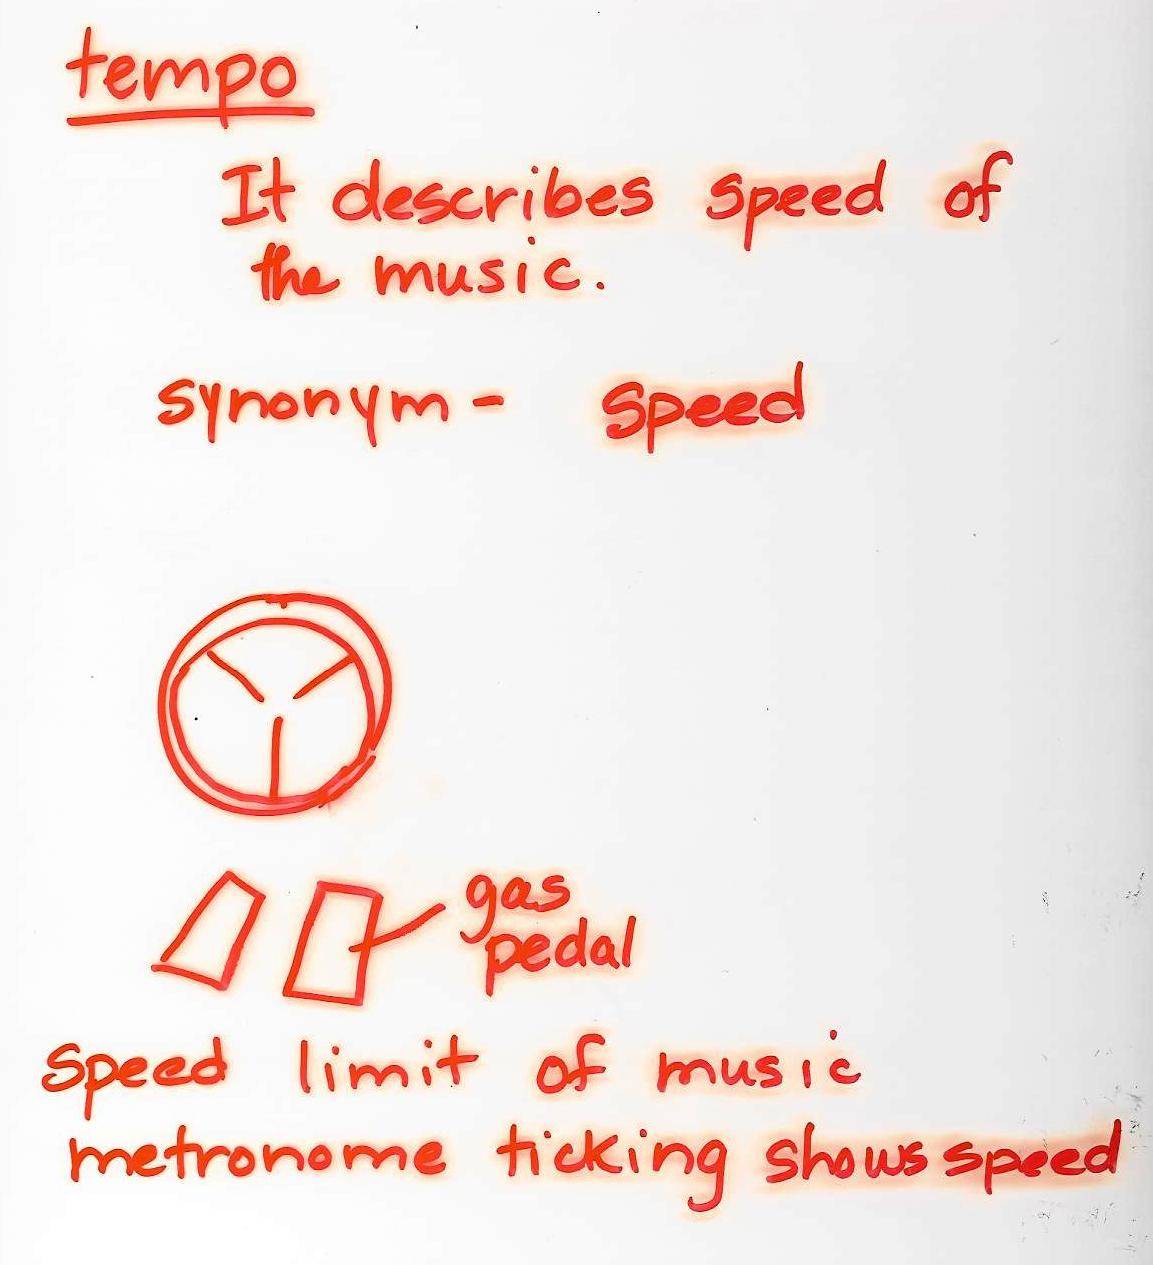 Tempo - Student Example Use Visual for Vocabulary